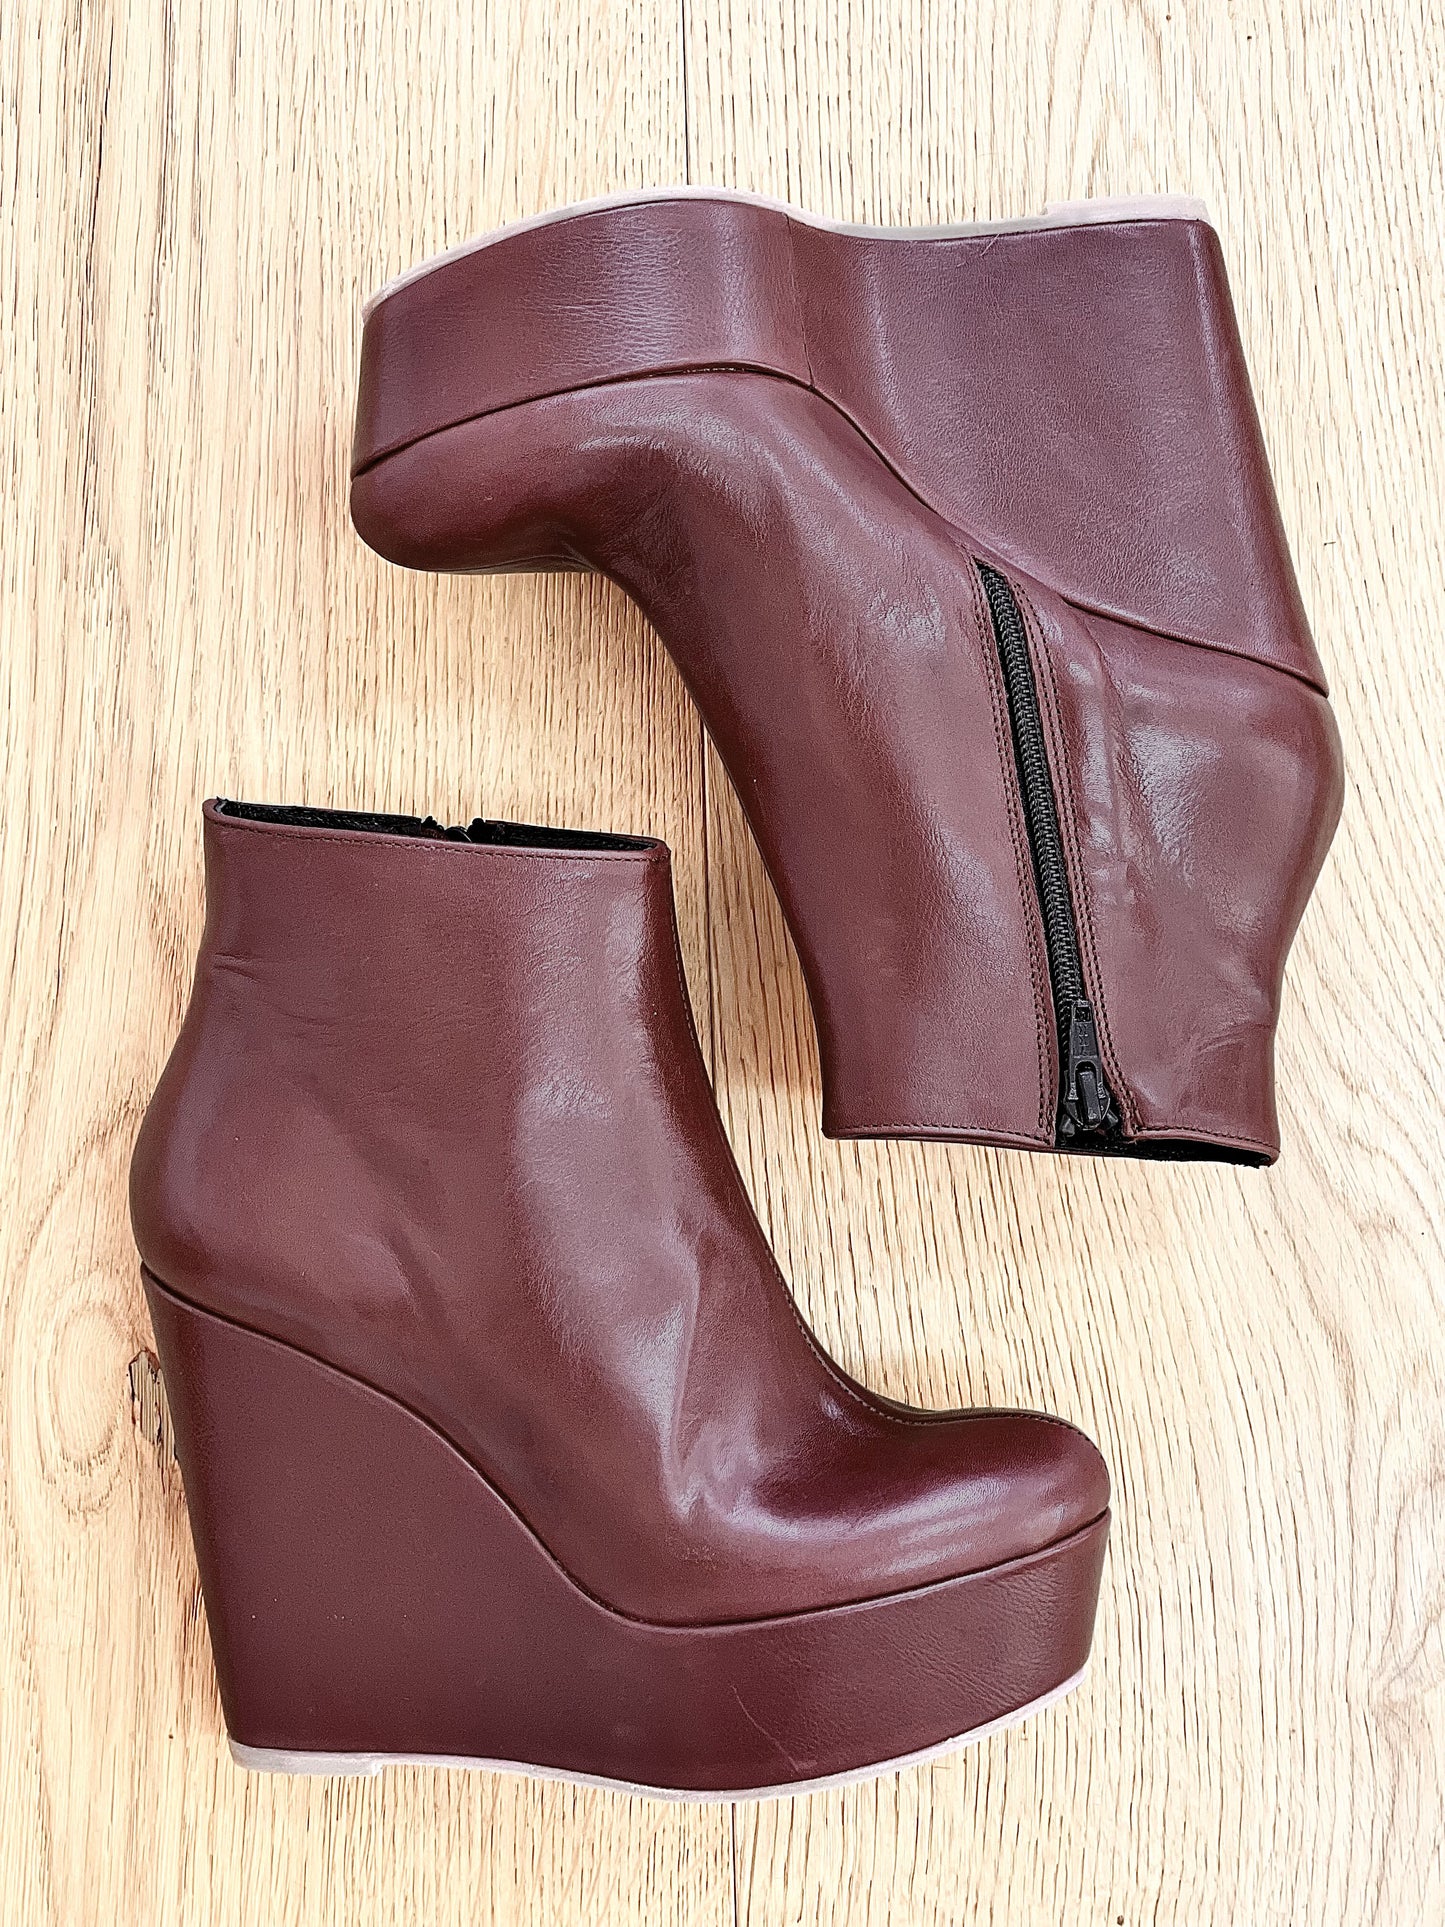 BROWN LEATHER BOOT